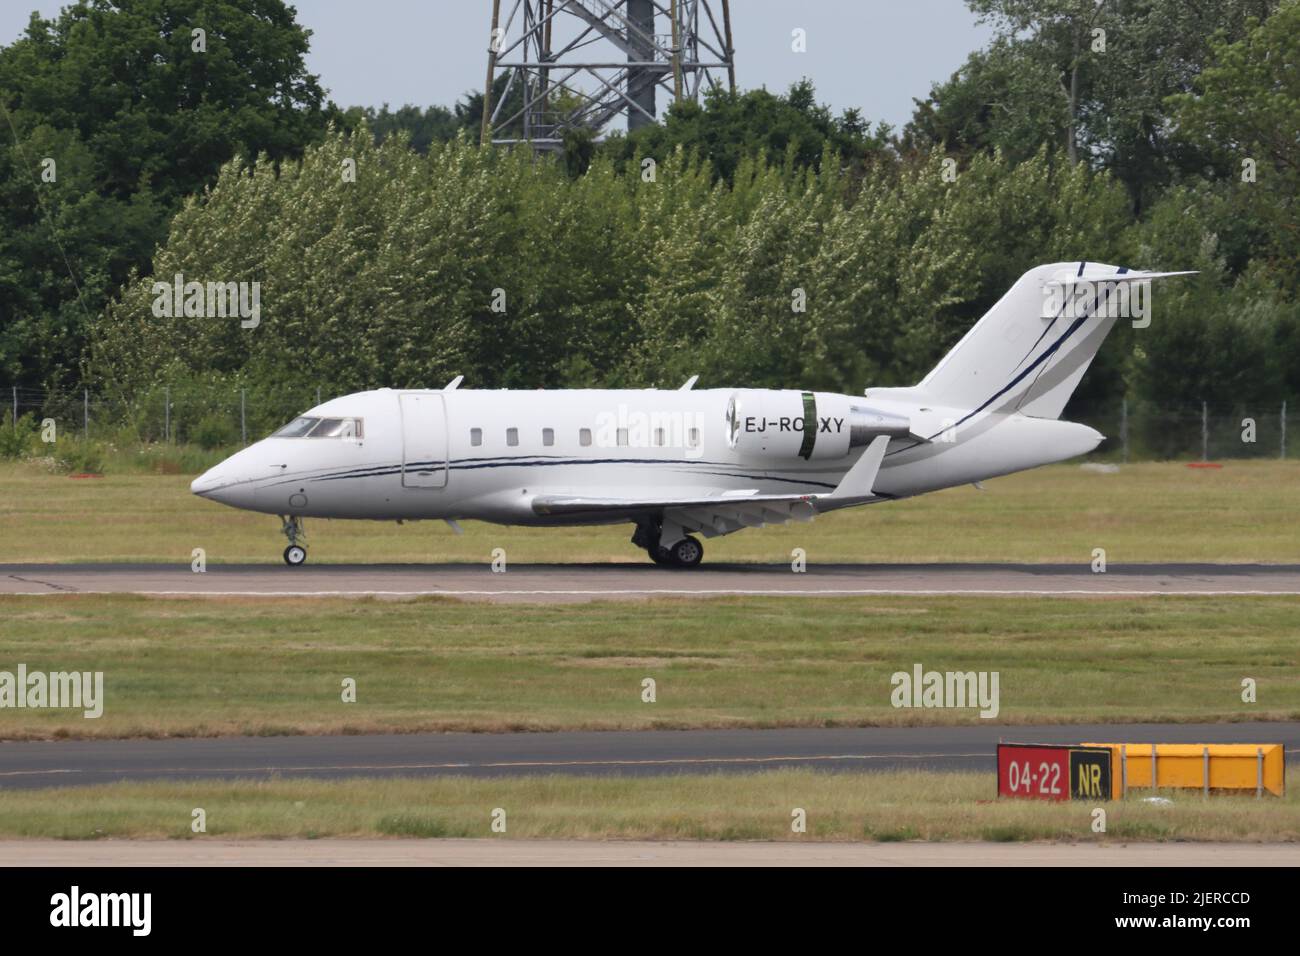 EJ-ROXY, Bombardier Challenger 605, arriving at Stansted Airport, Essex, UK Stock Photo